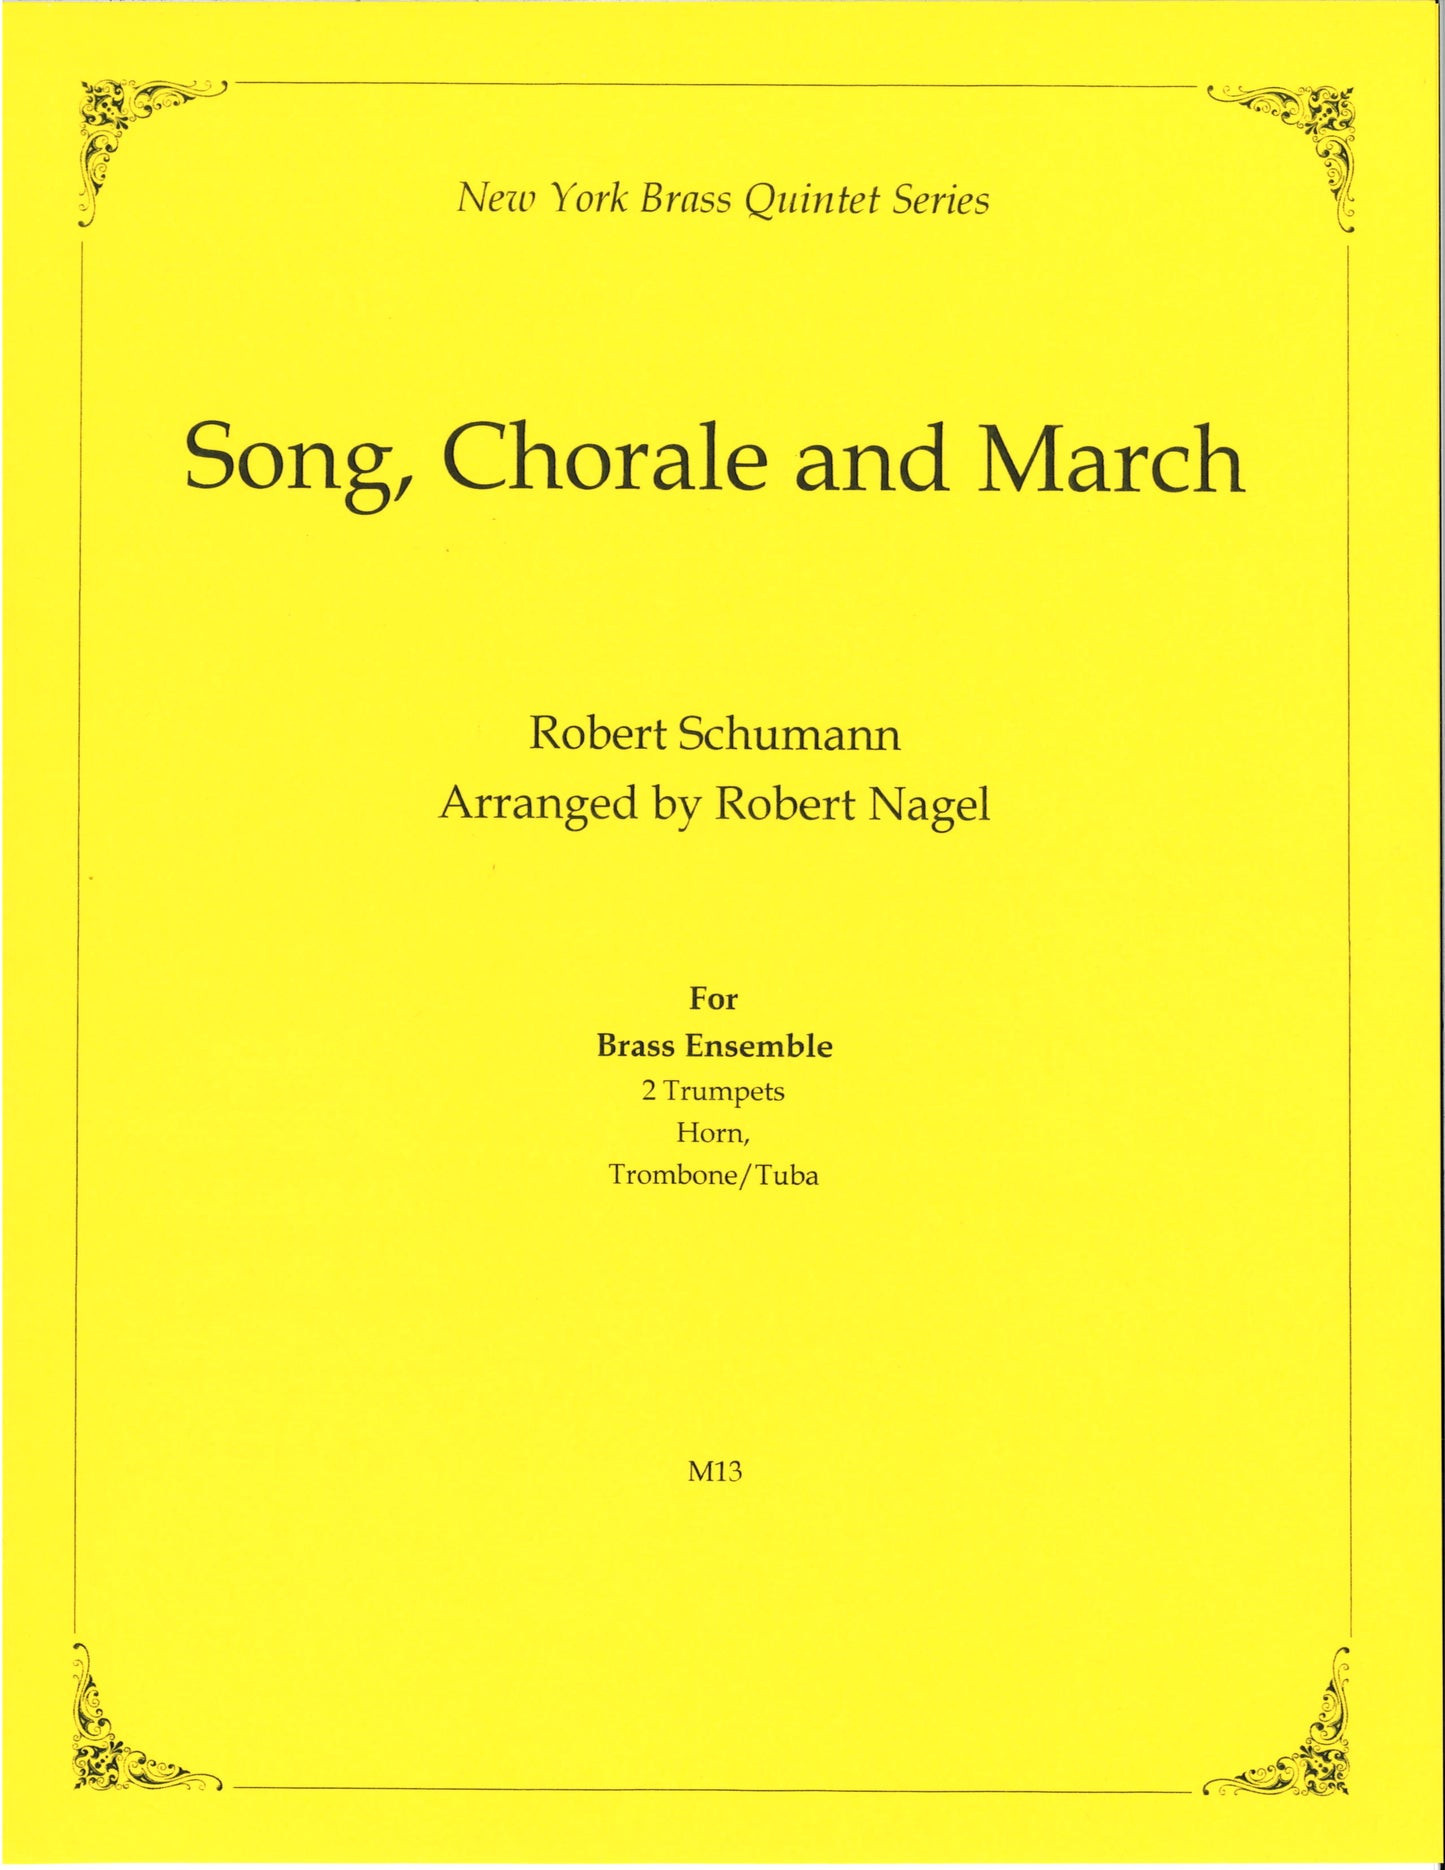 Song, Chorale and March for Brass Quintet